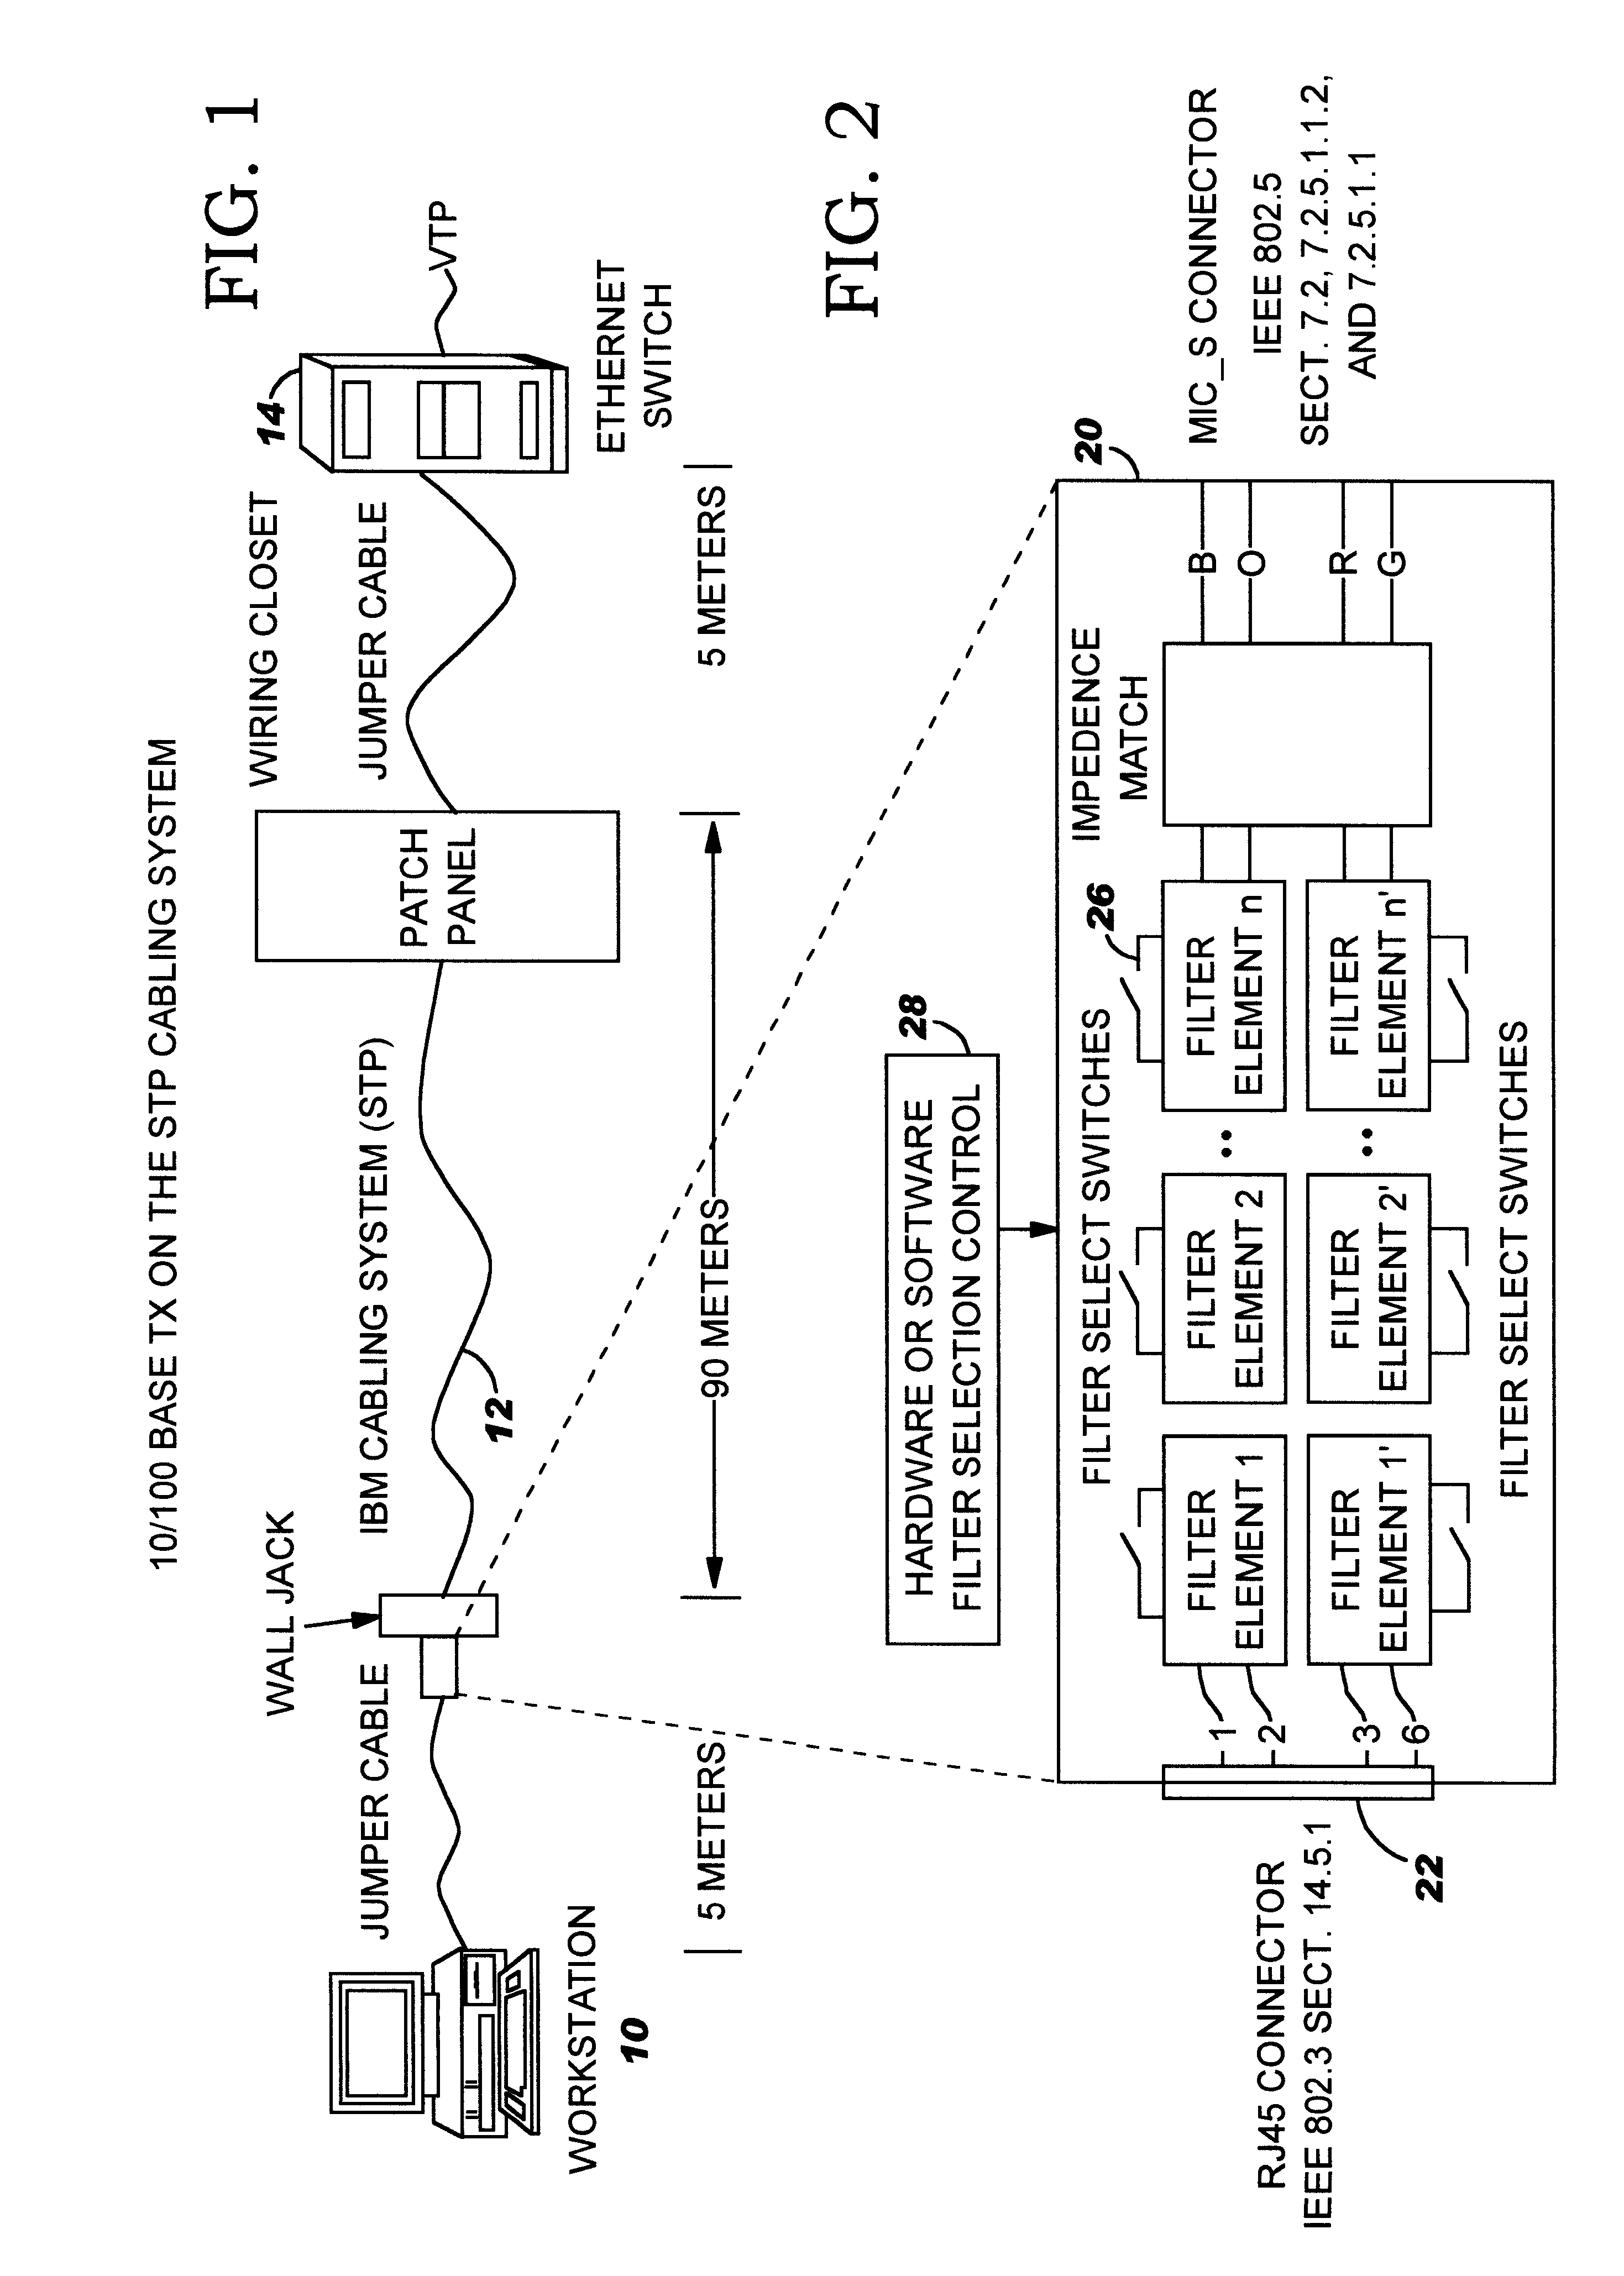 Adaptive interface apparatus and method for data terminal elements in a communication network transmitting and receiving ethernet over a shielded twisted pair cabling system